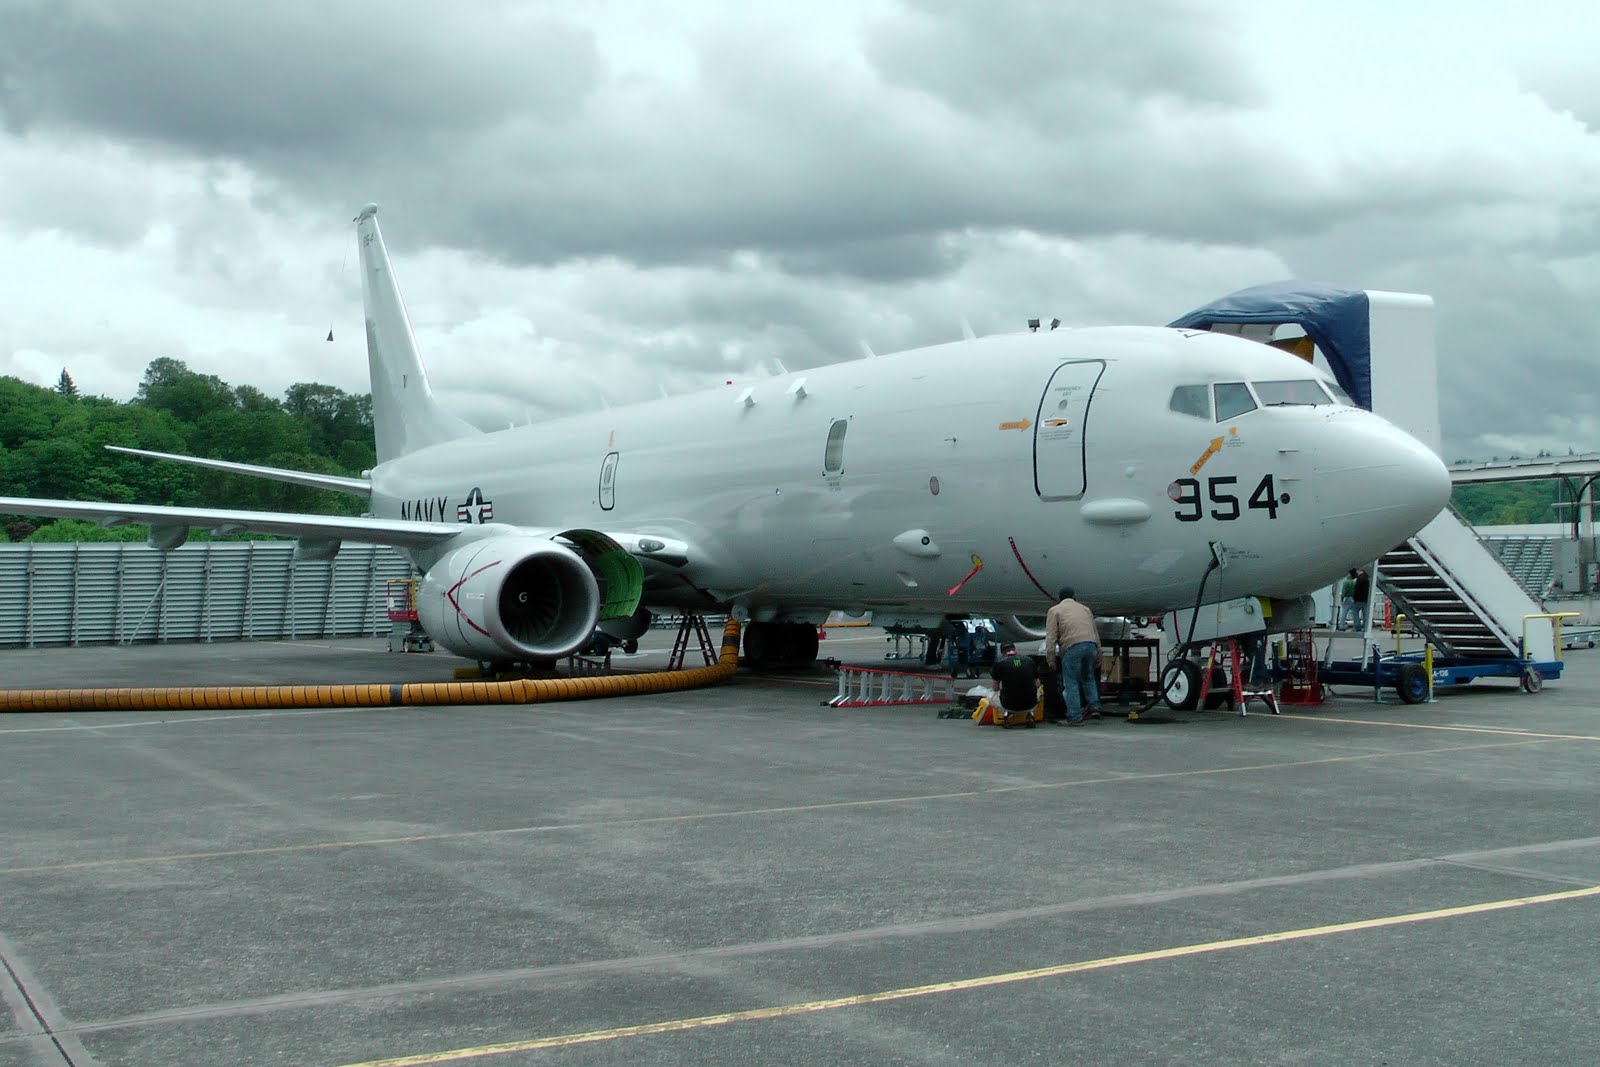 BOEING has sold the Indian Navy 12 'Poseidon P8I'; with an option to sell 12 more. BOEINGS P-8I Poseidon, (LRMR) Long Range Maritime Reconnaissance aicraft, is a derivative of B737-800 series. This is the most advanced Anti-submarine aircraft being developed with latest Active Electronic Steered Array (AESA) radar & electronic warfare systems aboard. This aircraft is a feather in the cap for the Indian Navy !! 